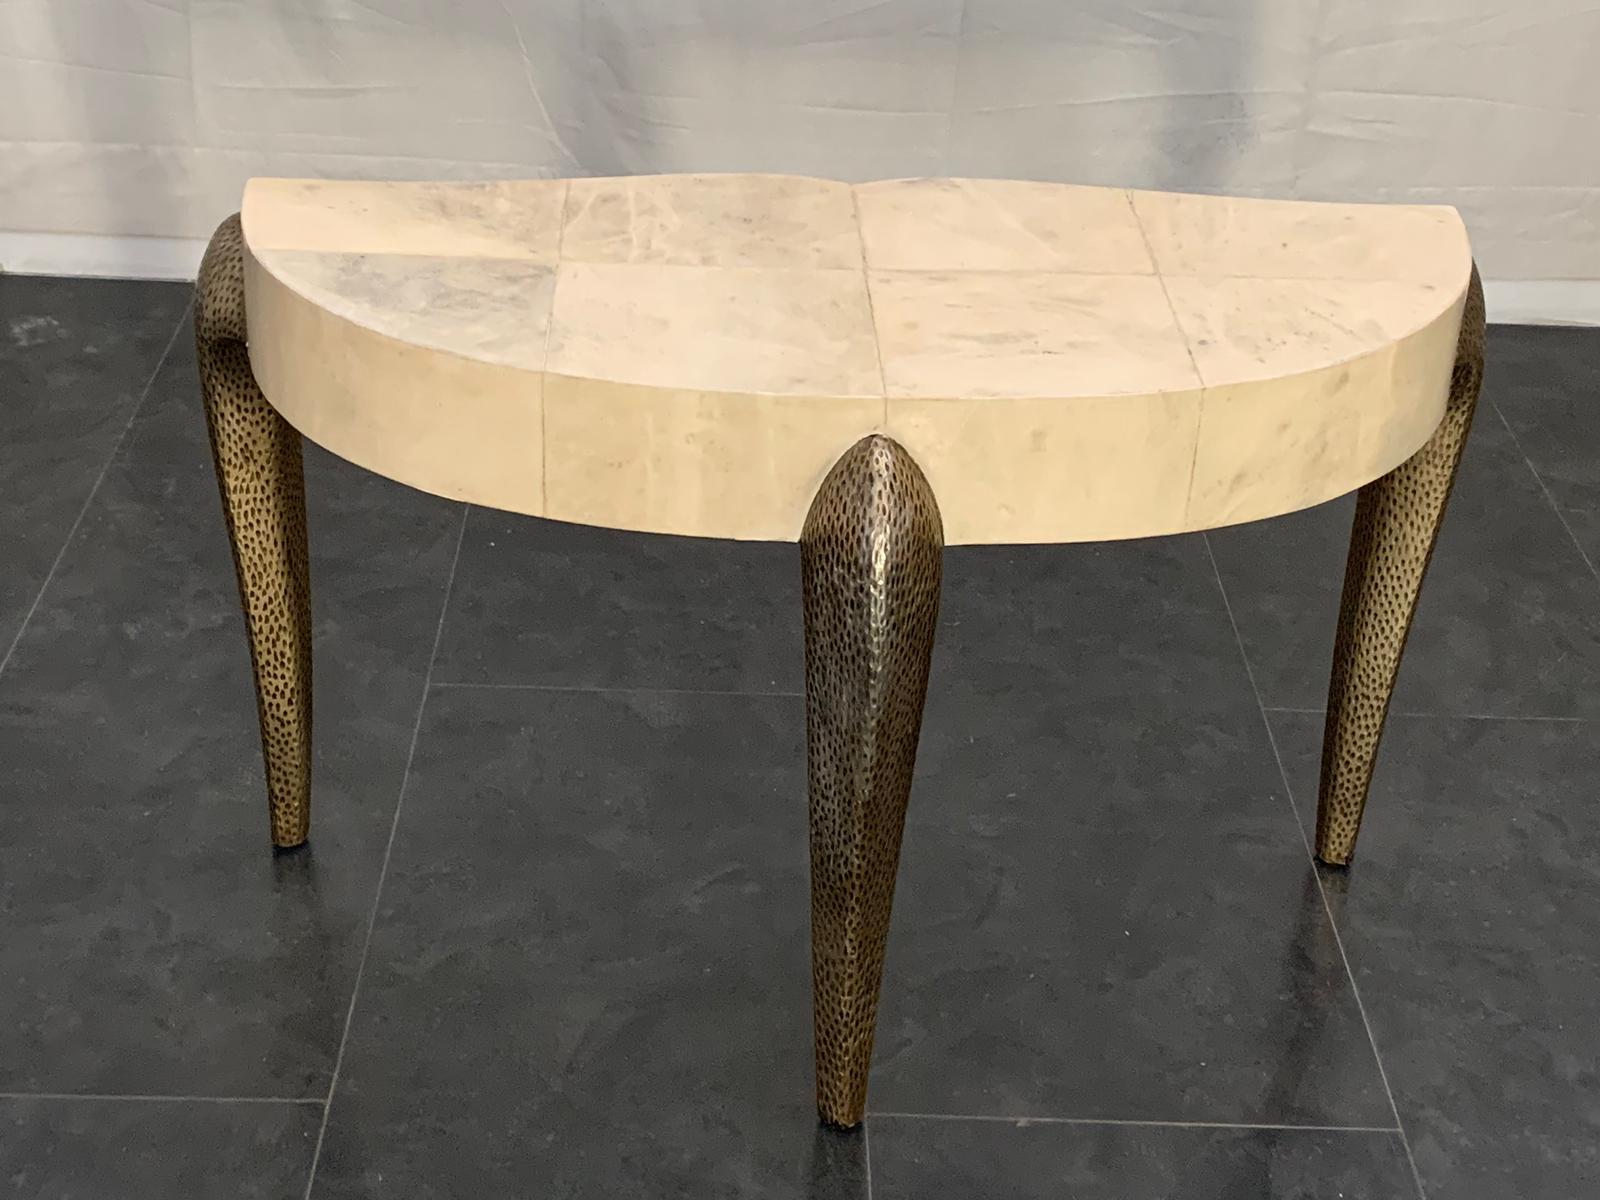 Elegant desk table, with arched legs and finished baccellate silver leaf patinated, the body is covered in parchment. Italy, '90s.
Packaging with bubble wrap and cardboard boxes is included. If the wooden packaging is needed (fumigated crates or